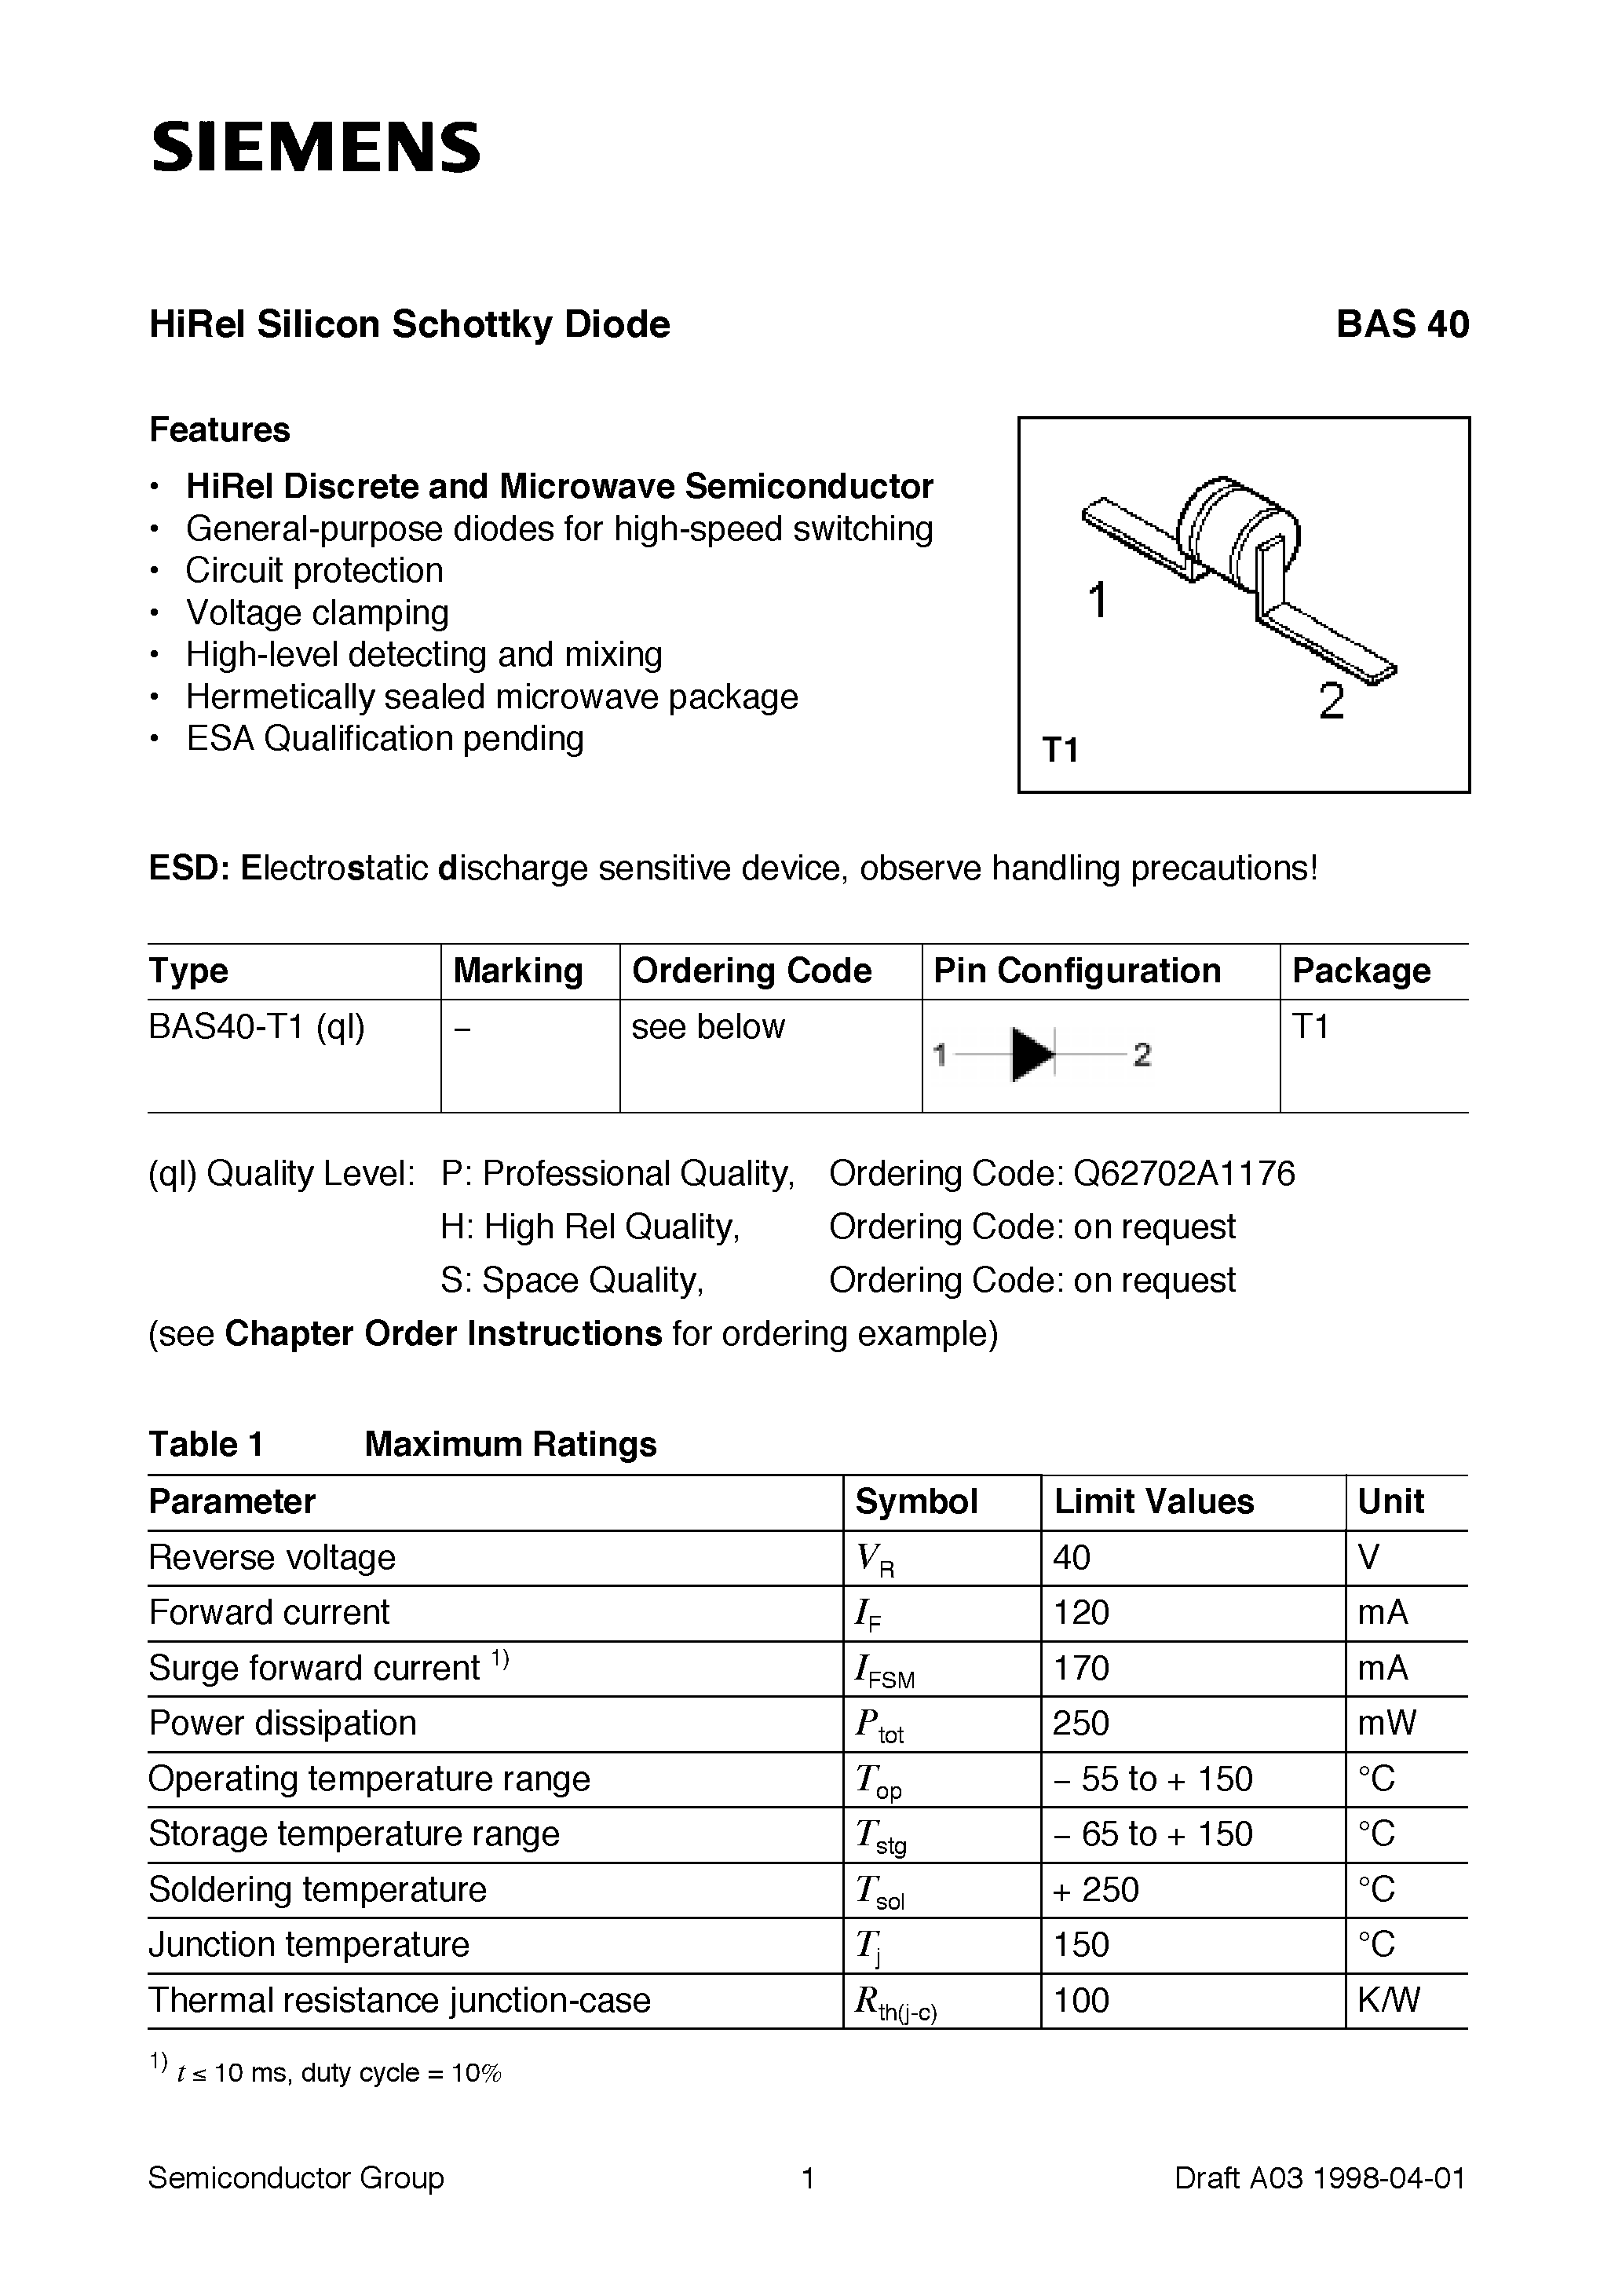 Datasheet BAS40-T1 - HiRel Silicon Schottky Diode (HiRel Discrete and Microwave Semiconductor General-purpose diodes for high-speed switching Circuit protection) page 1